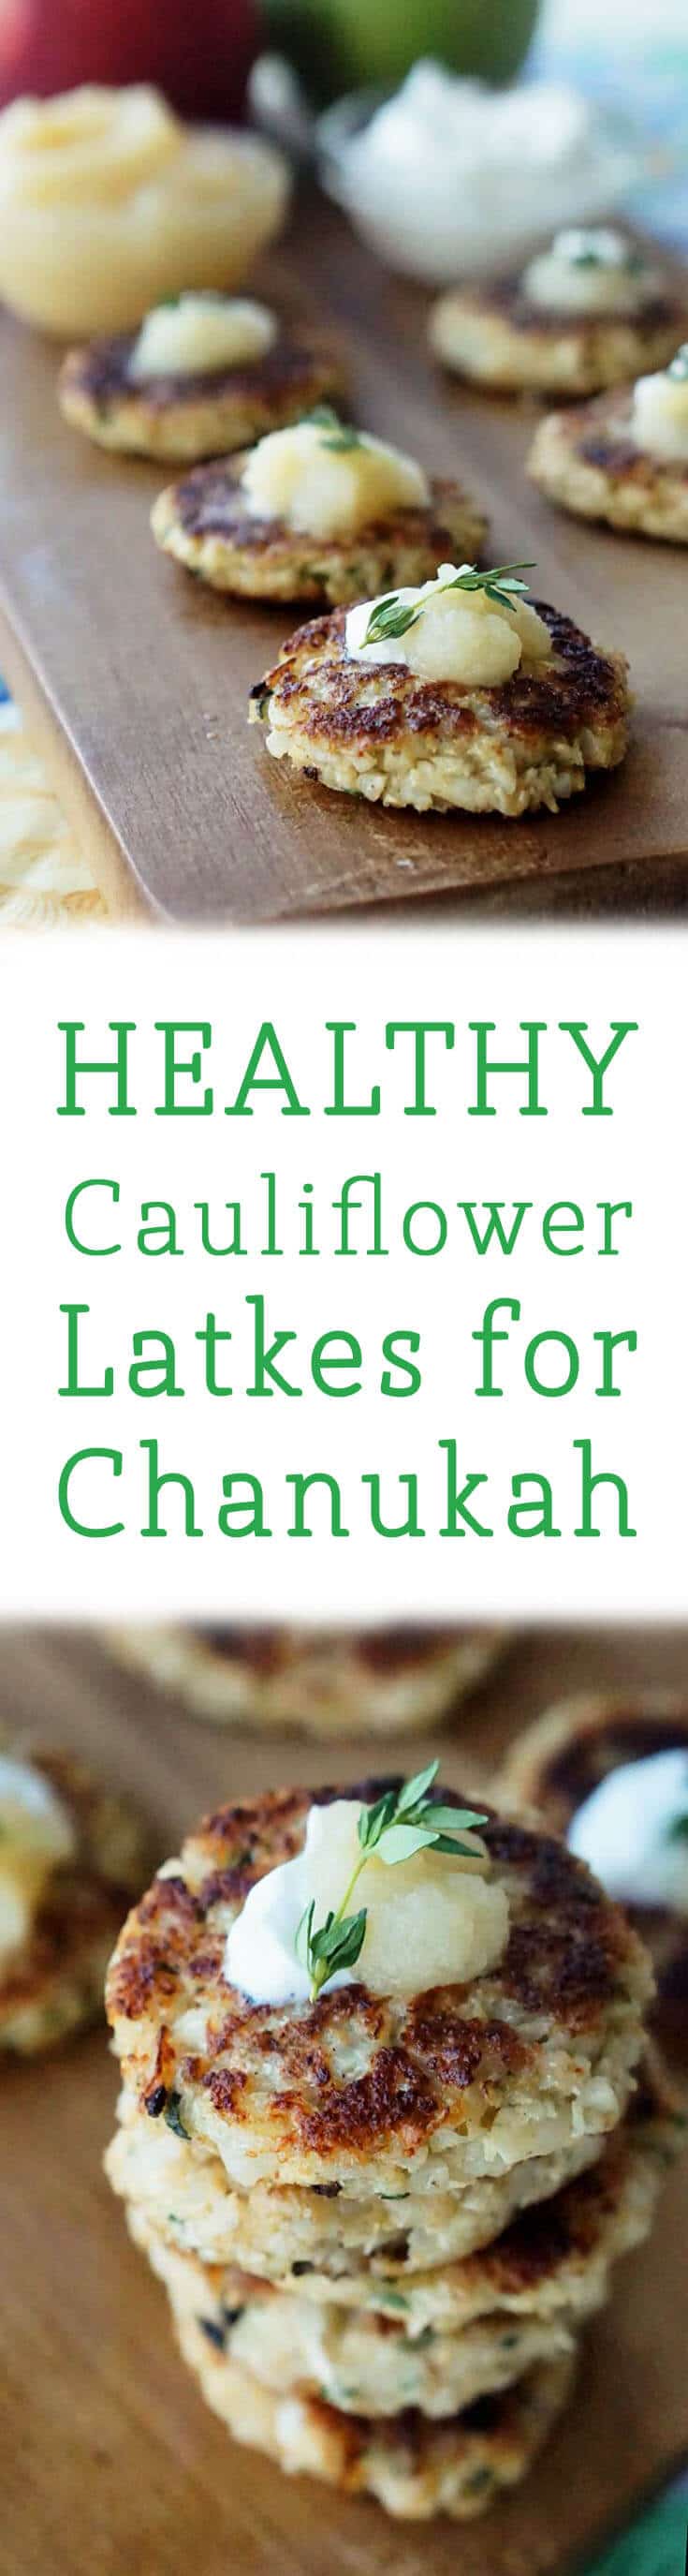 These healthy Cauliflower latkes are a great healthy option for your annual Chanukuh celebrations!